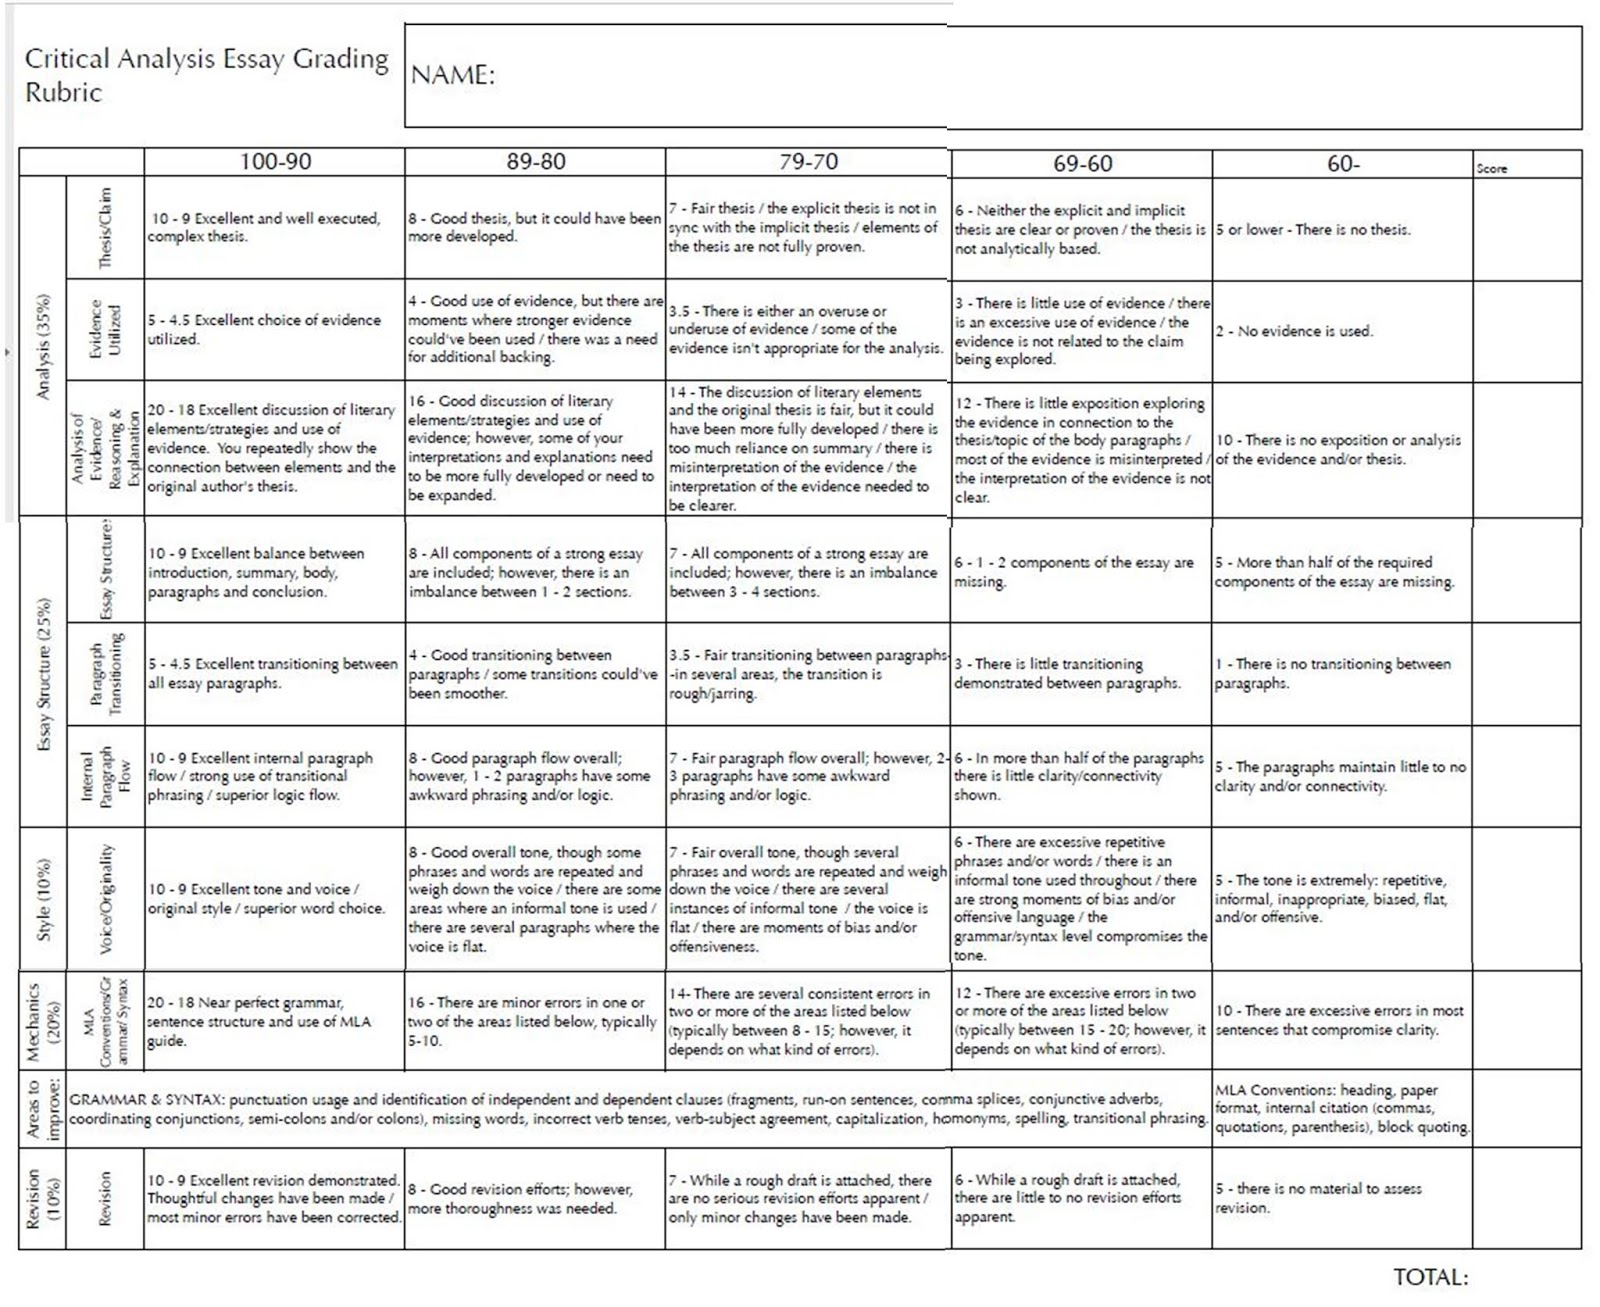 rubric for critical analysis essay